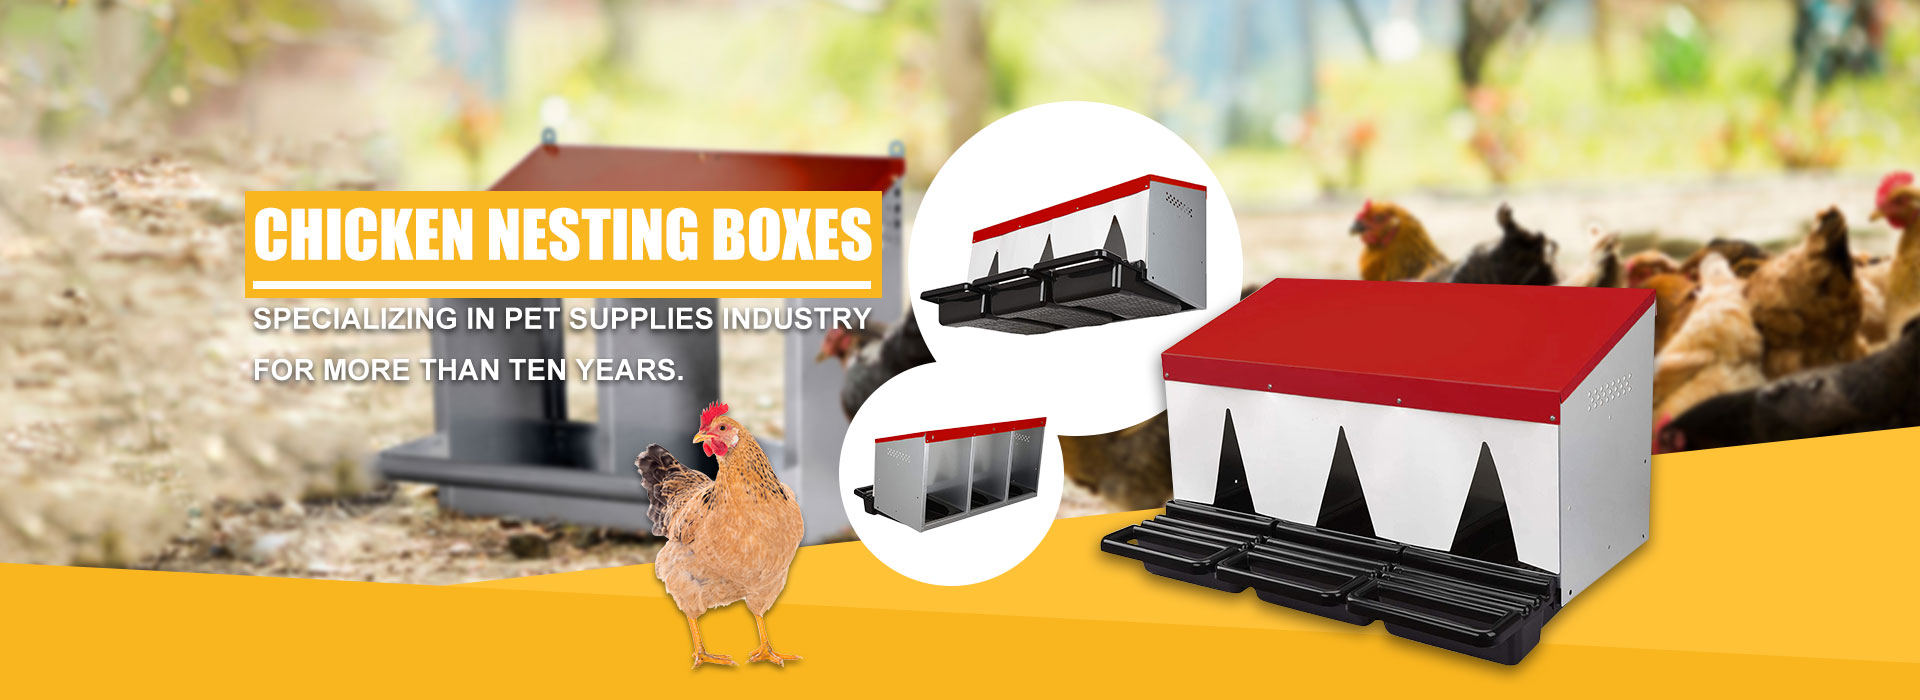 Kina Chicken Nesting Boxes Factory